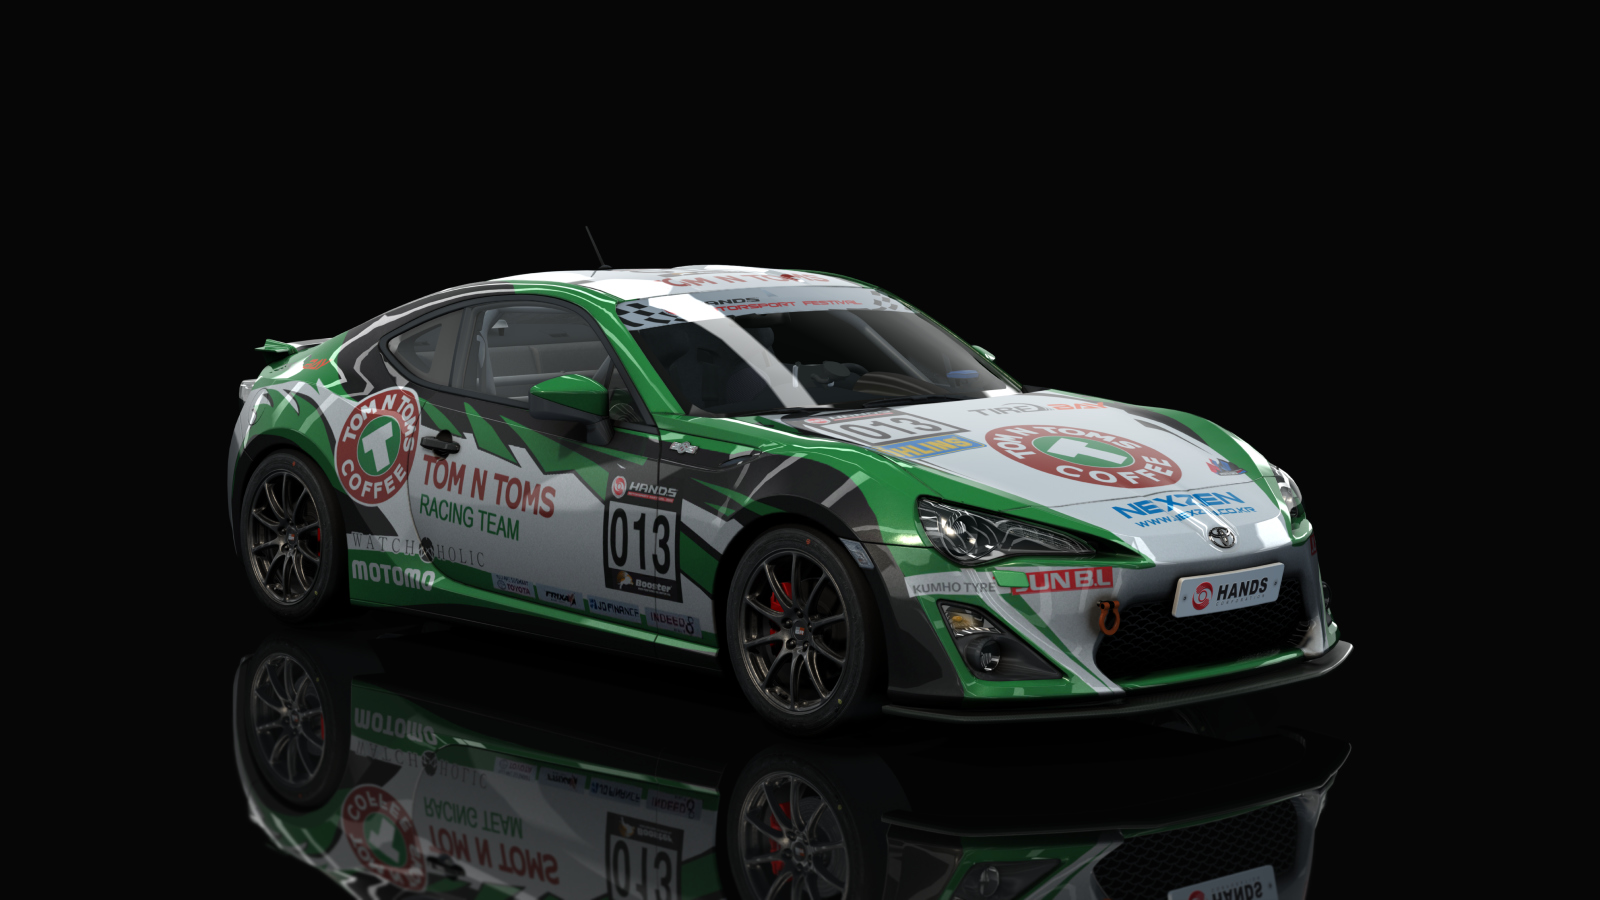 Toyota GT86 Cup, skin 013_TOMnTOMS